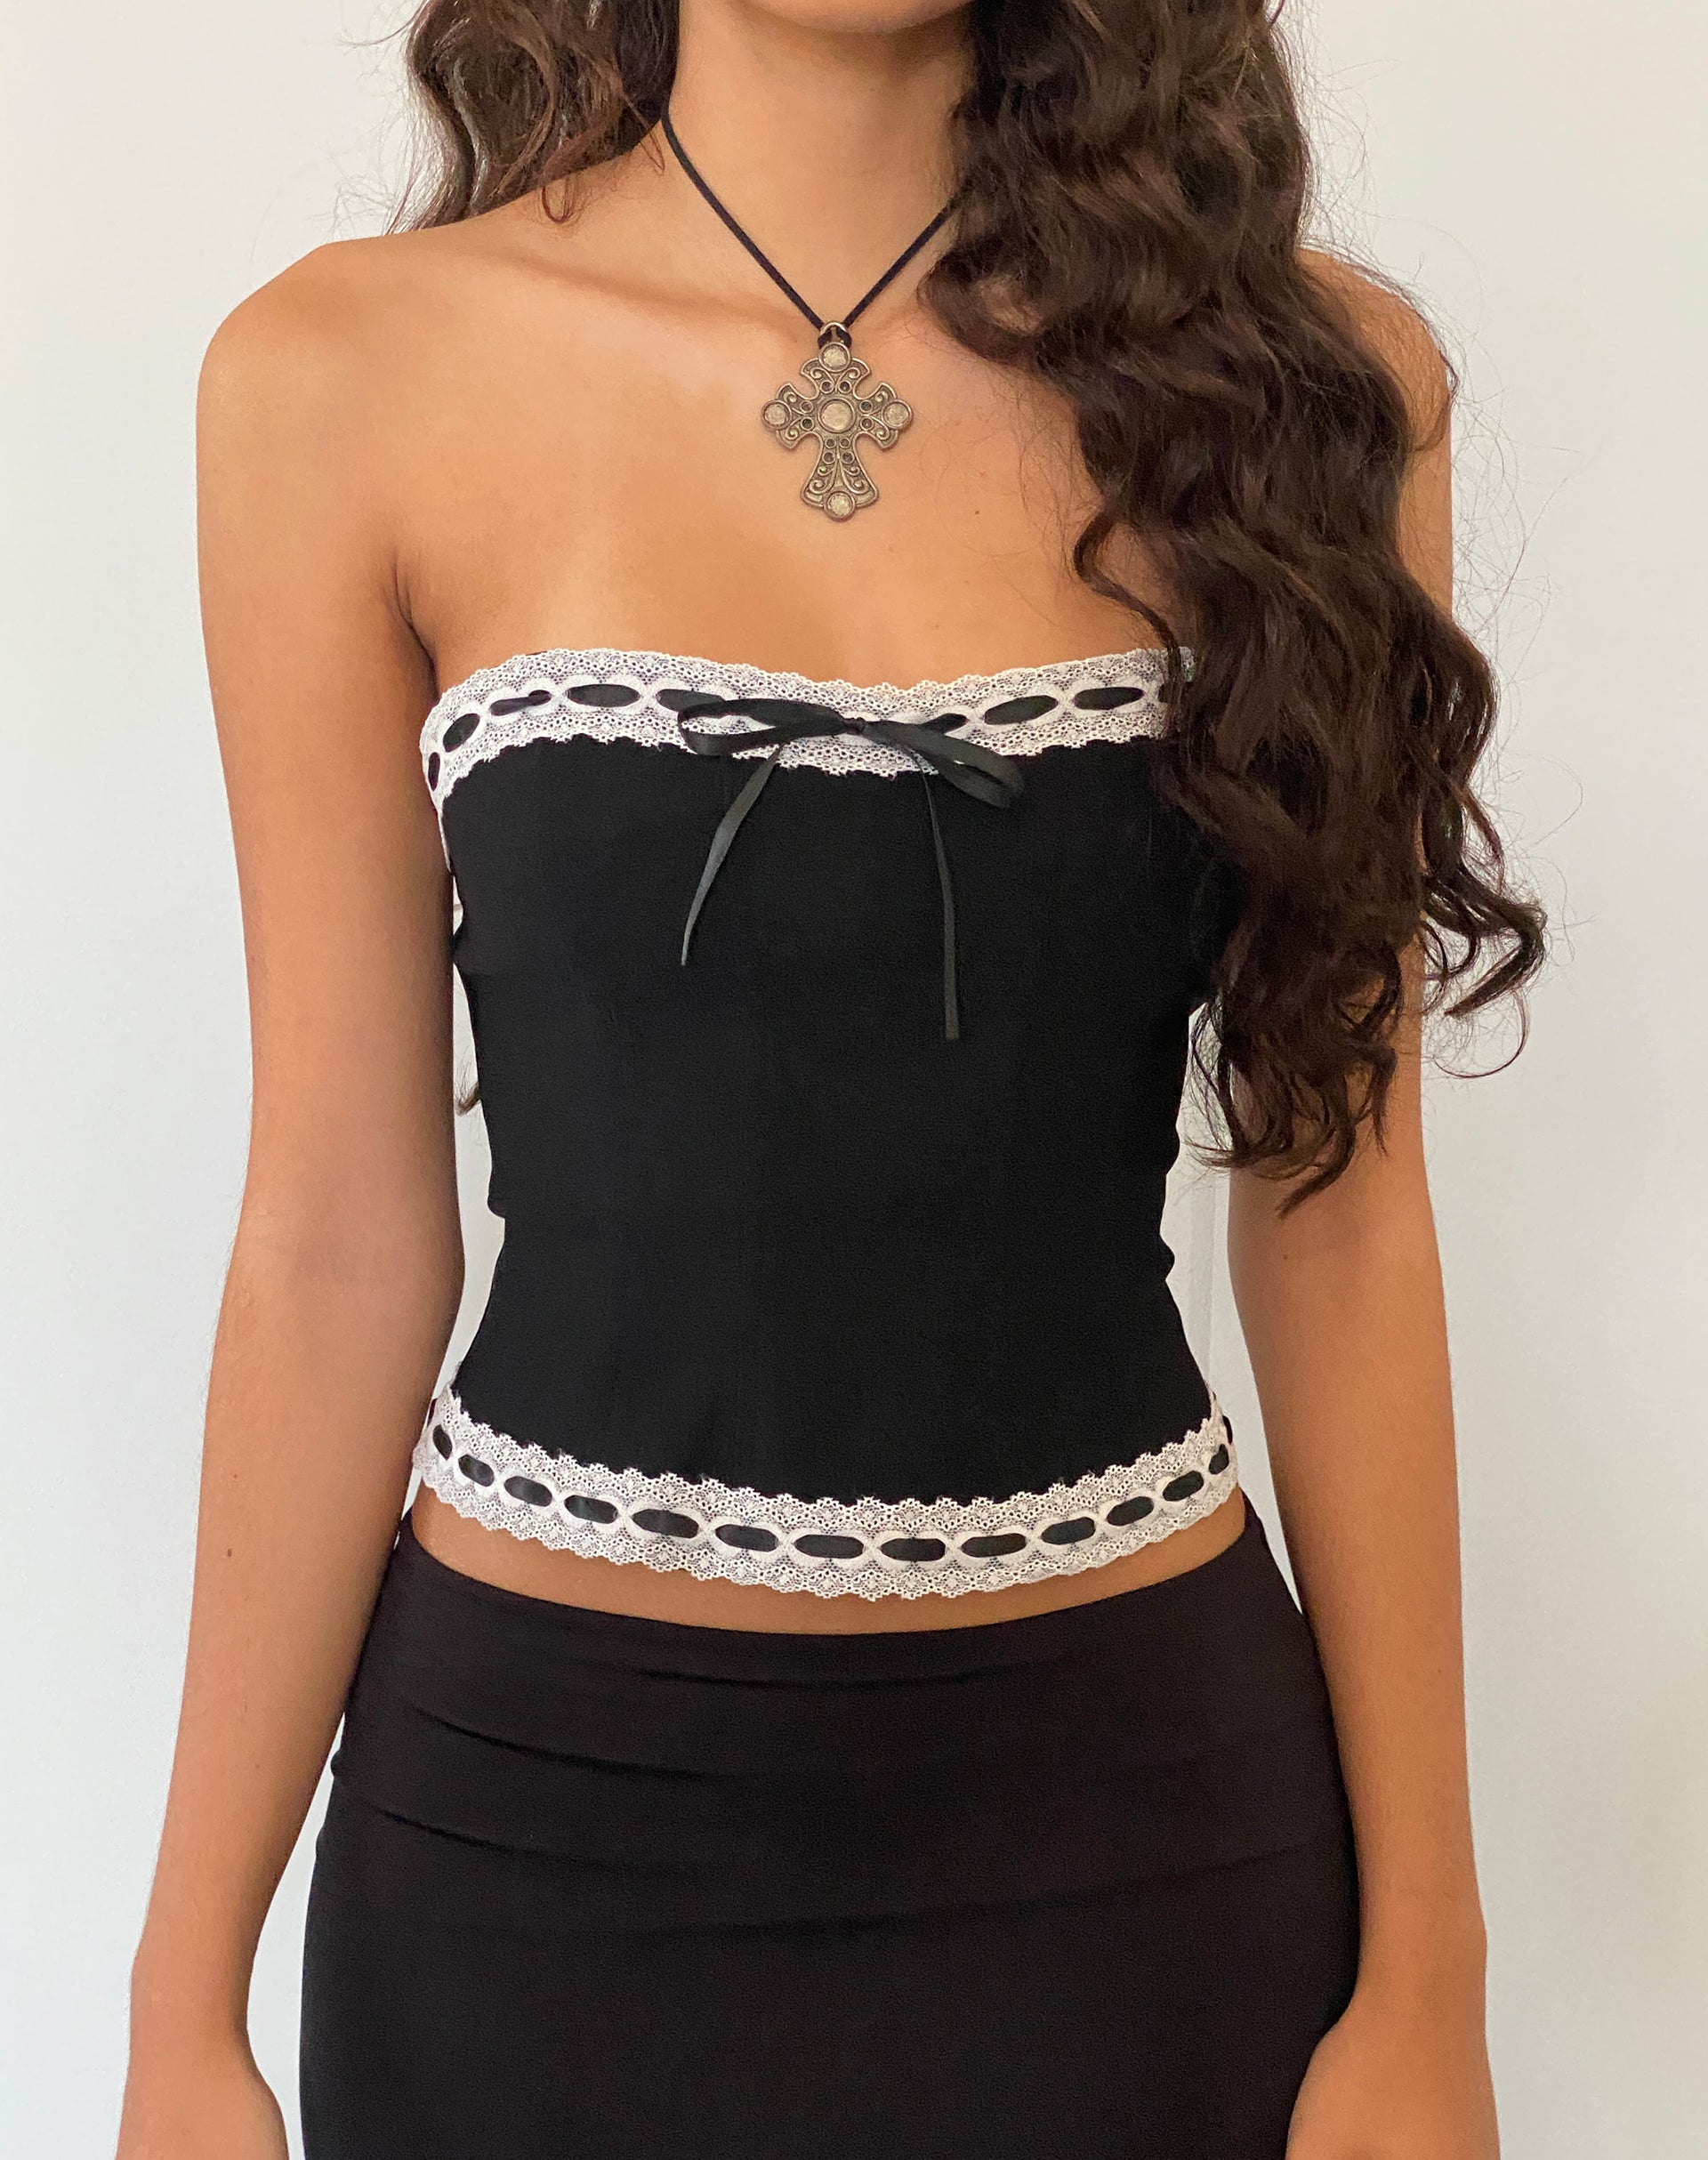 Missguided lace corset style top in black